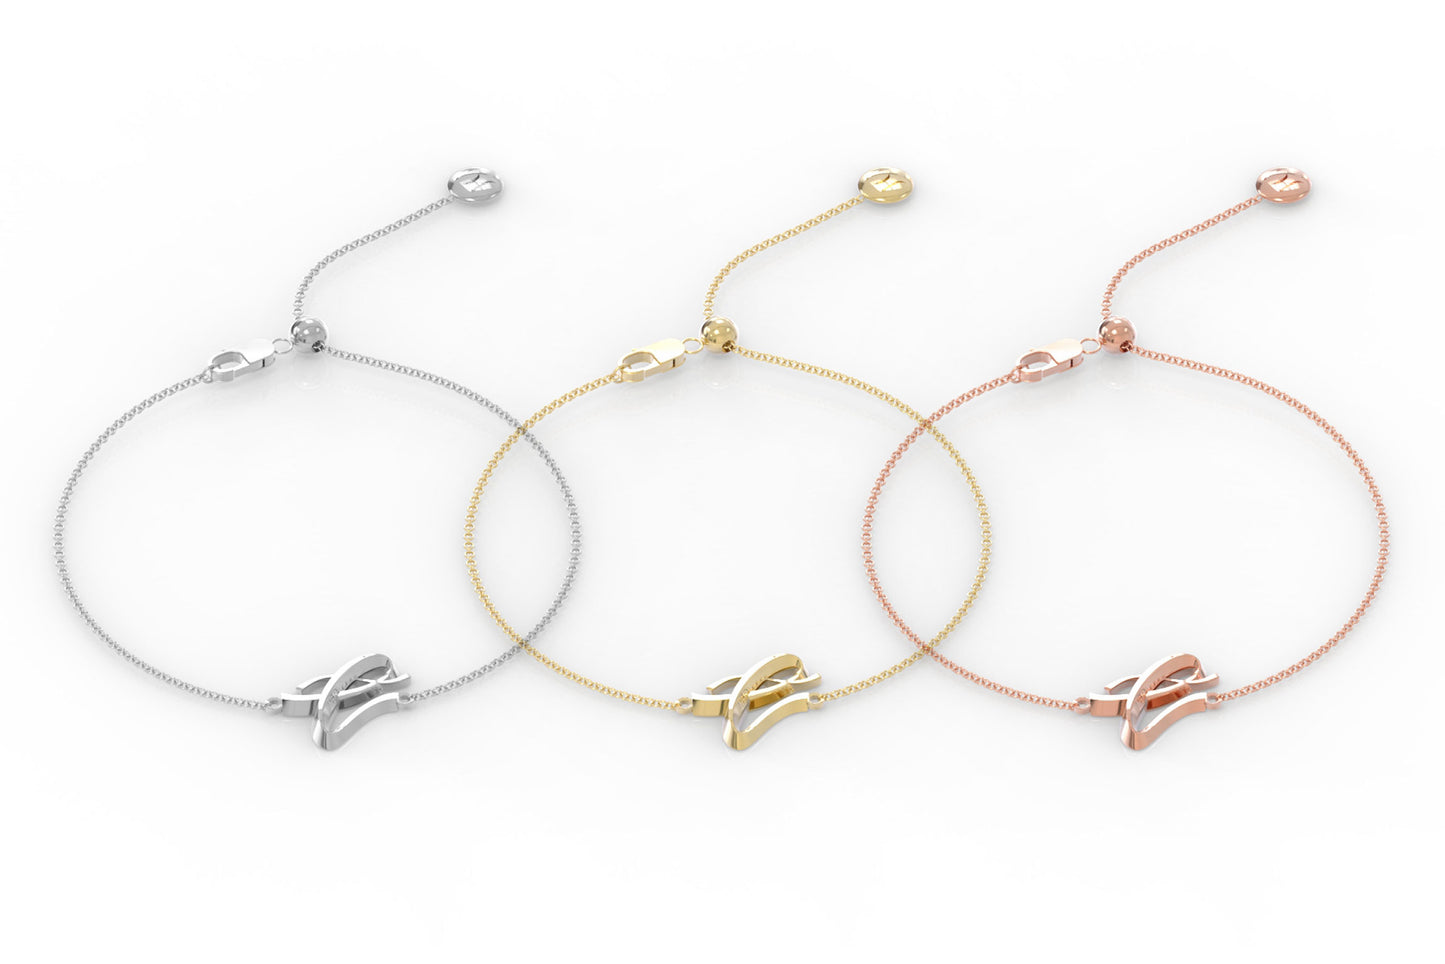 The Love Collect - "T" Bracelet